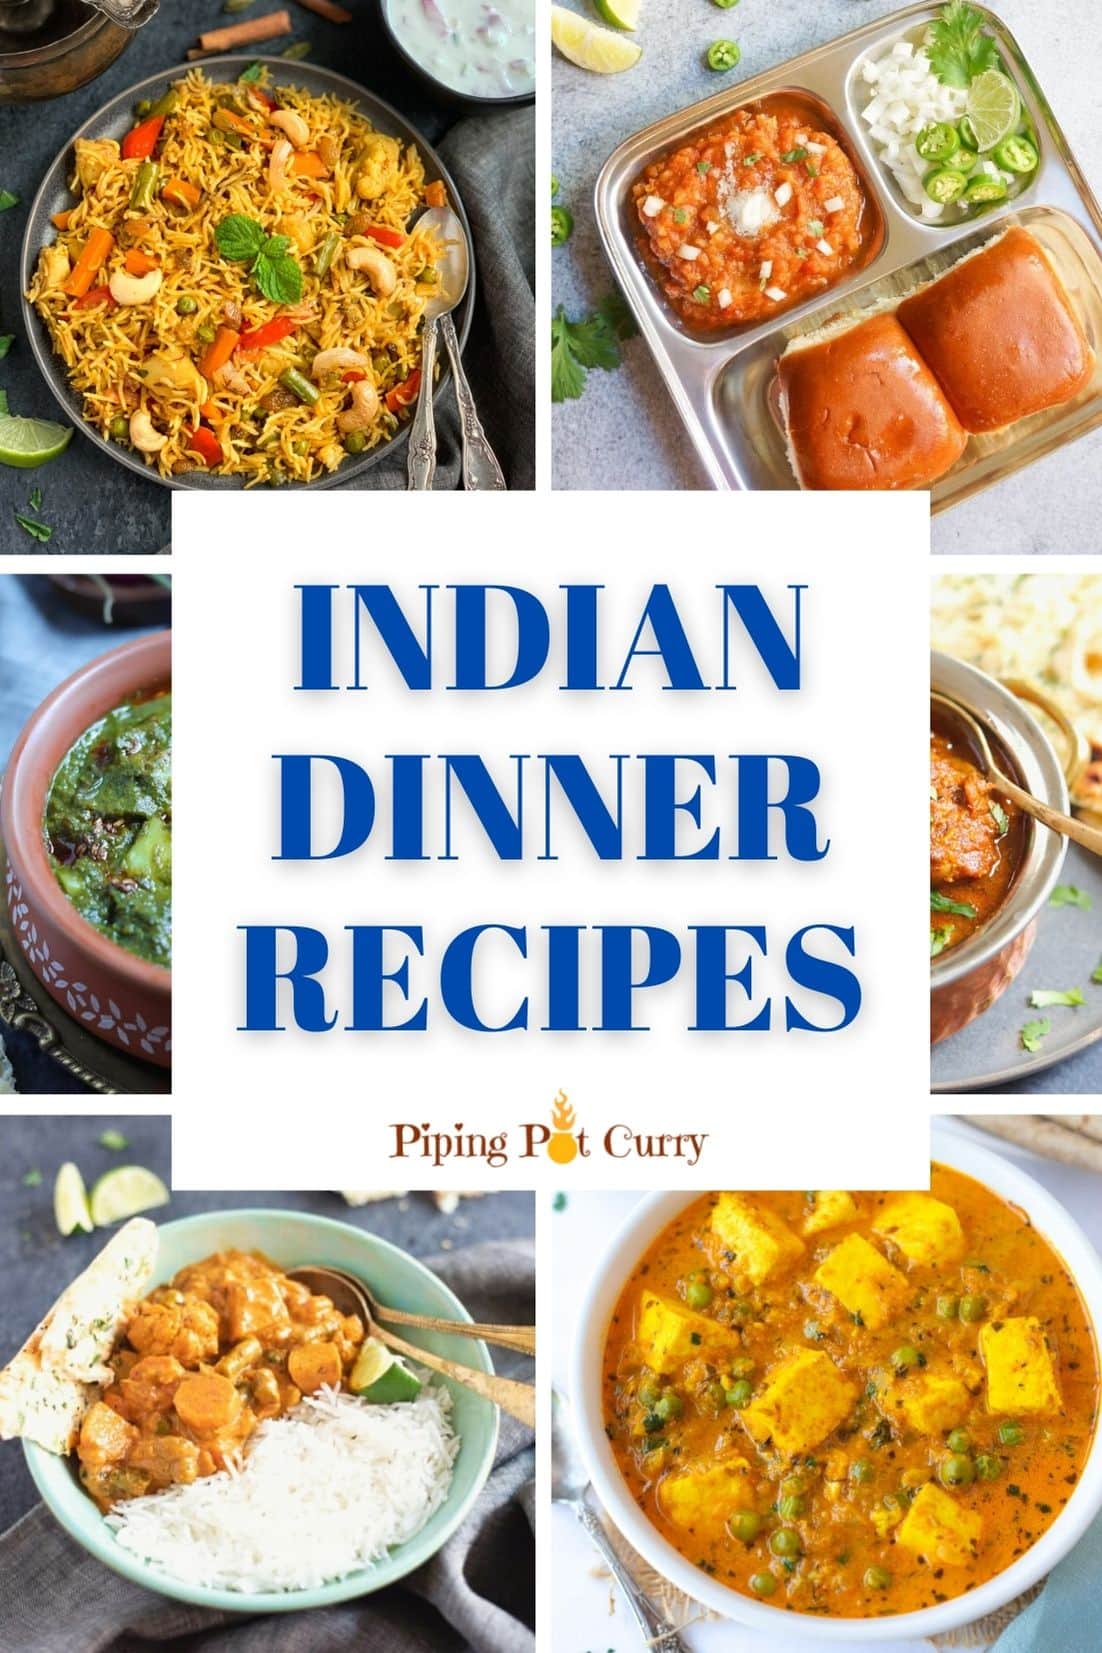 A collection of indian dinner recipes in a collage format